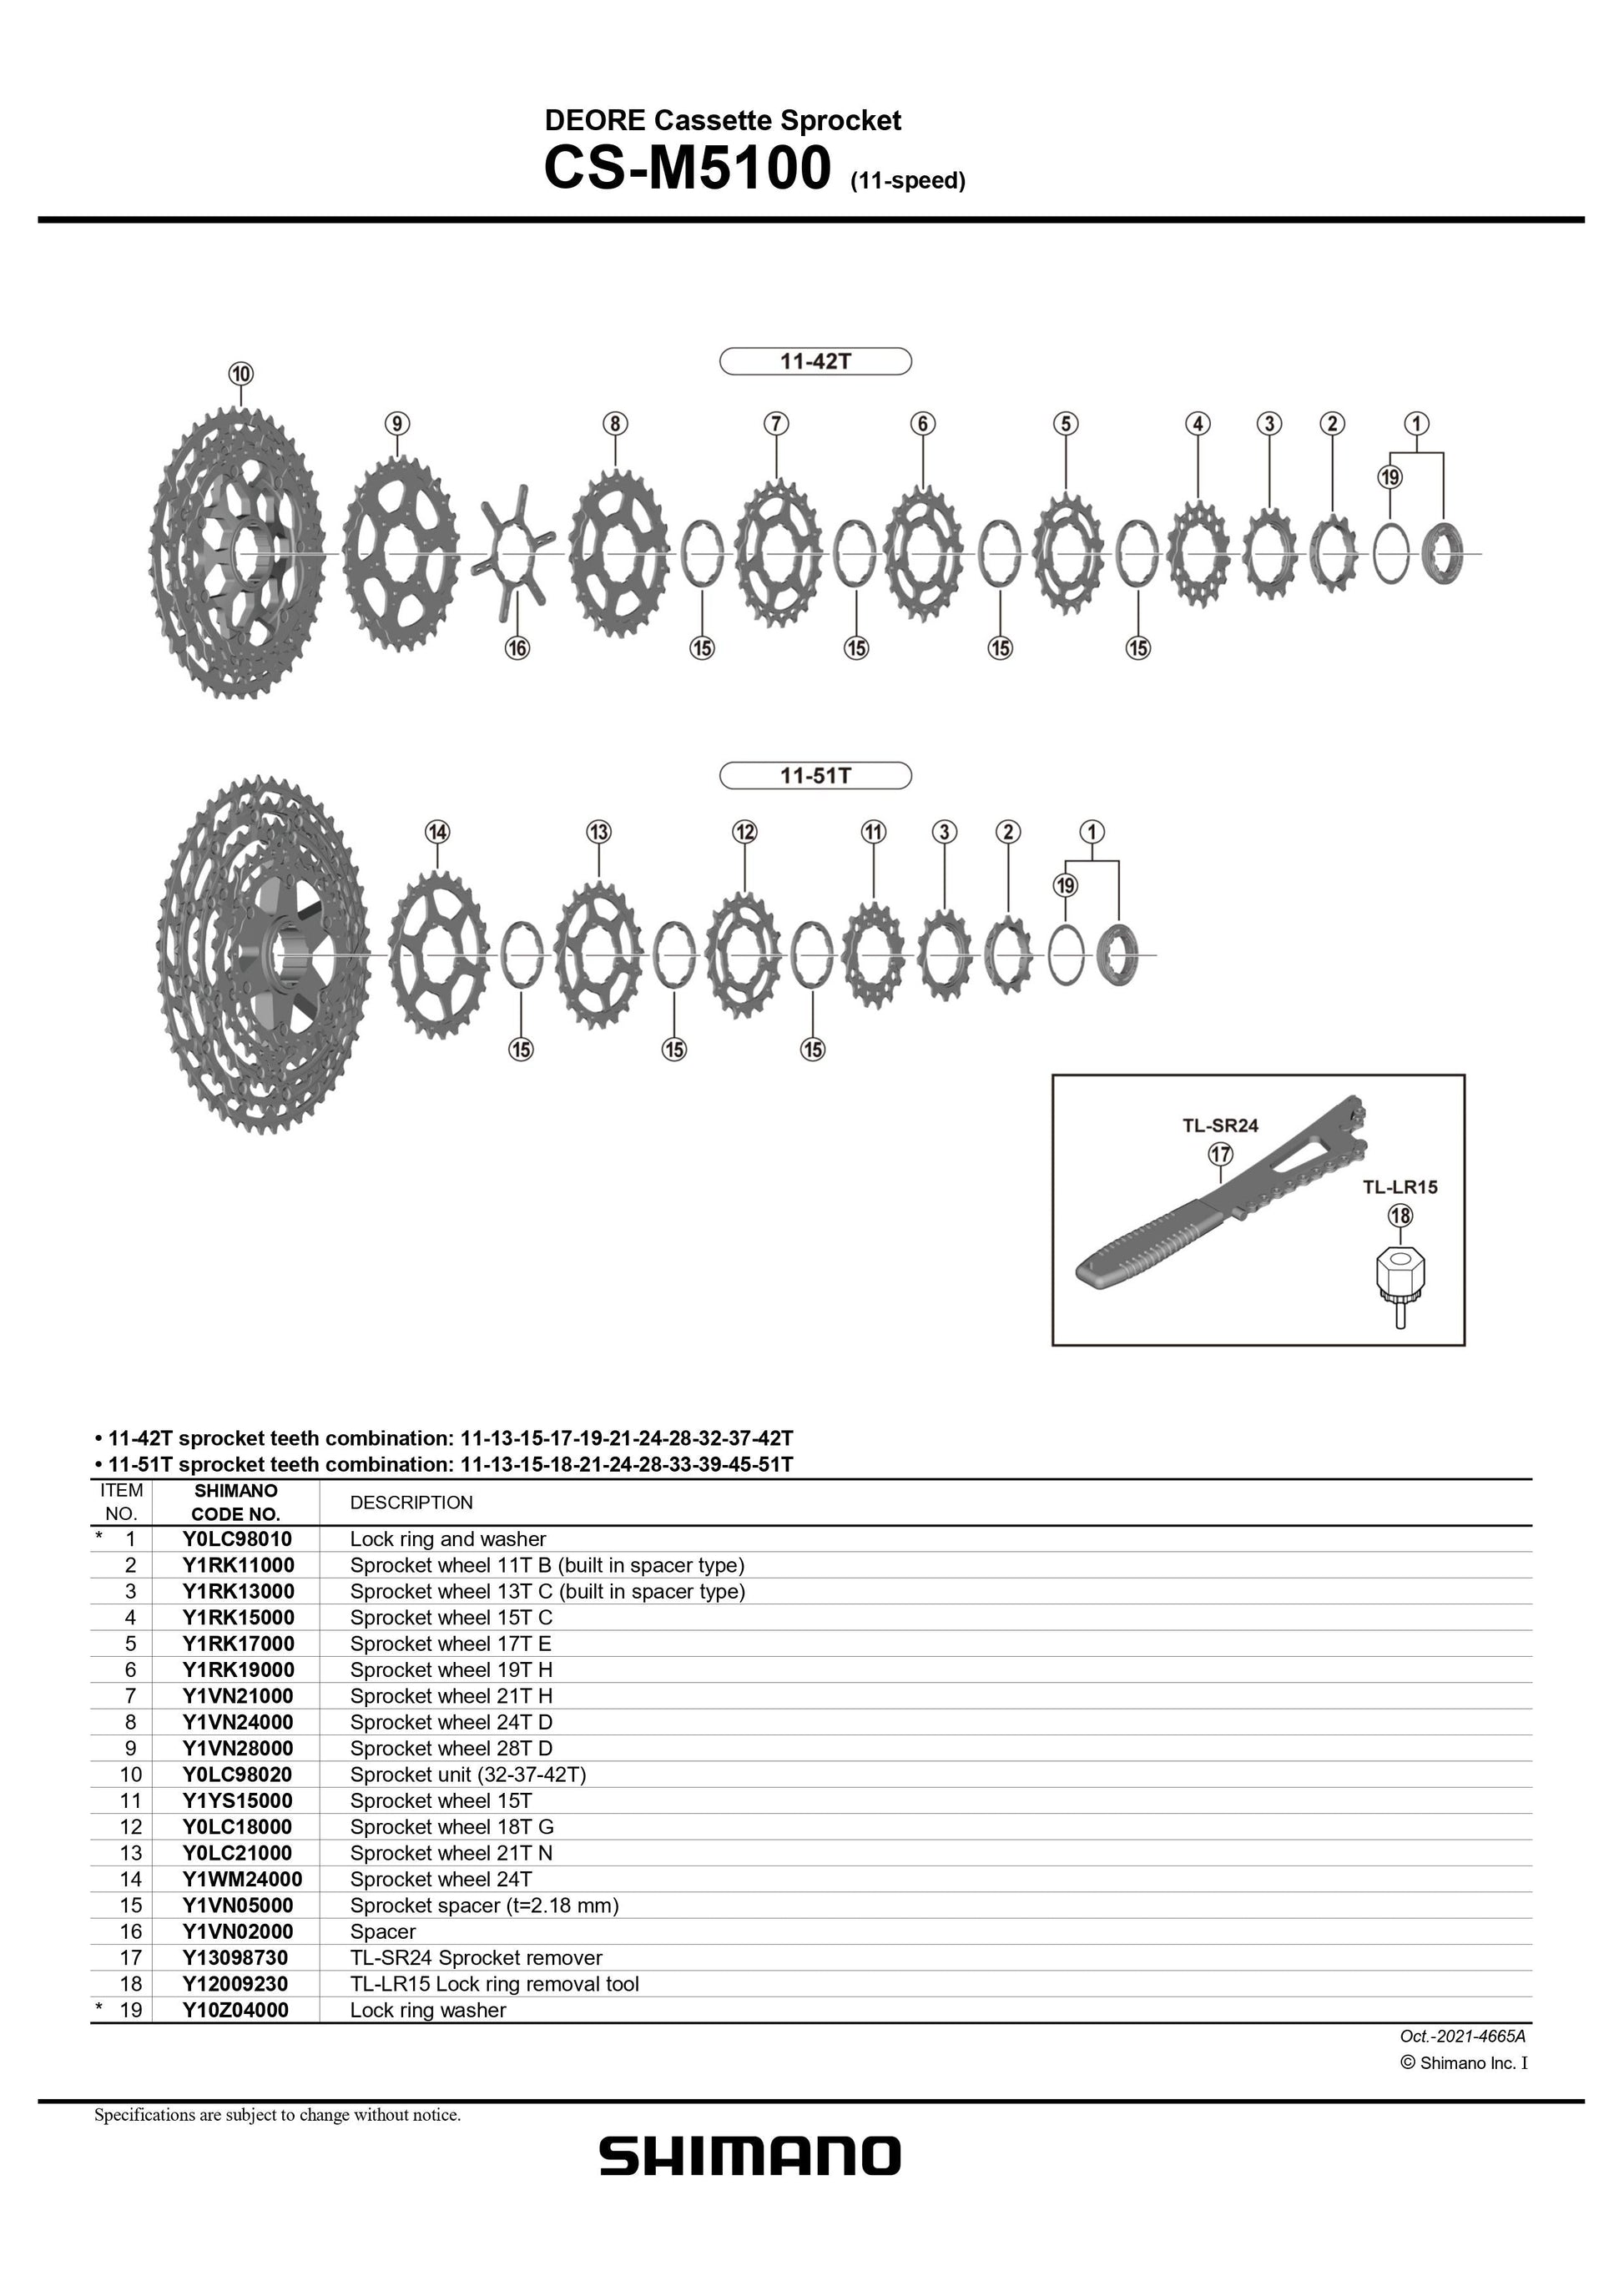 SHIMANO CS-M5100 Deore Cassette Sprocket Lock ring and washer - (11-Speed) - Y0LC98010-Pit Crew Cycles